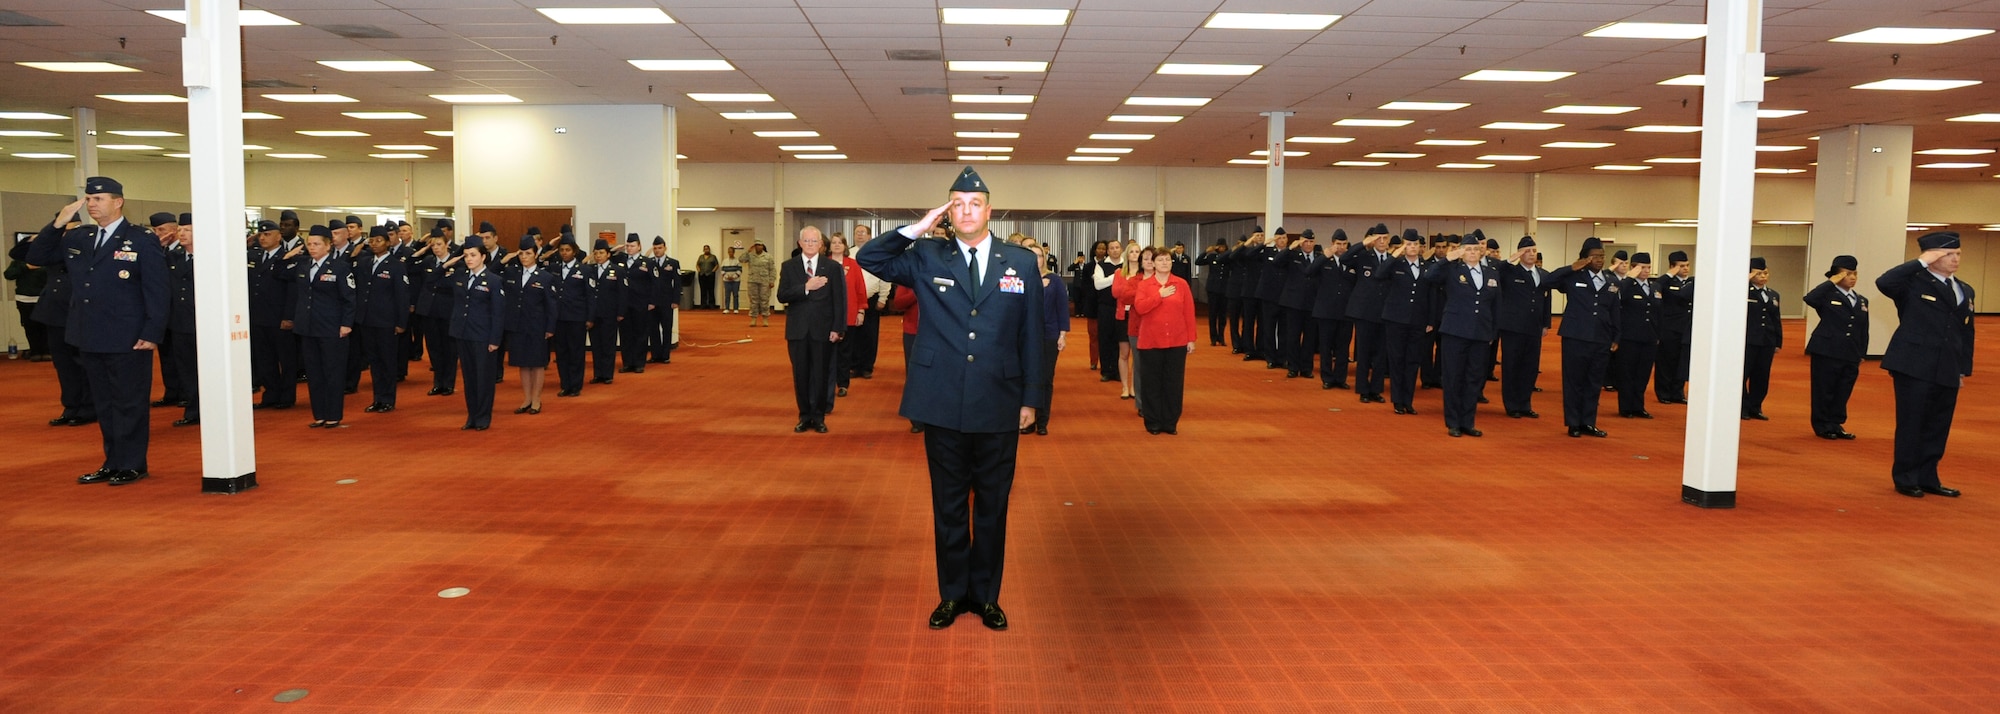 Col. Dave Zeh leads Air Reserve Personnel flights as the commander of the troops during the National Anthem at the change of command ceremony Nov. 29, 2010. Col. Patricia Blassie assumed command of the center from Brig. Gen. Kevin Pottinger. (U.S. Air Force photo/Kevin Bell)